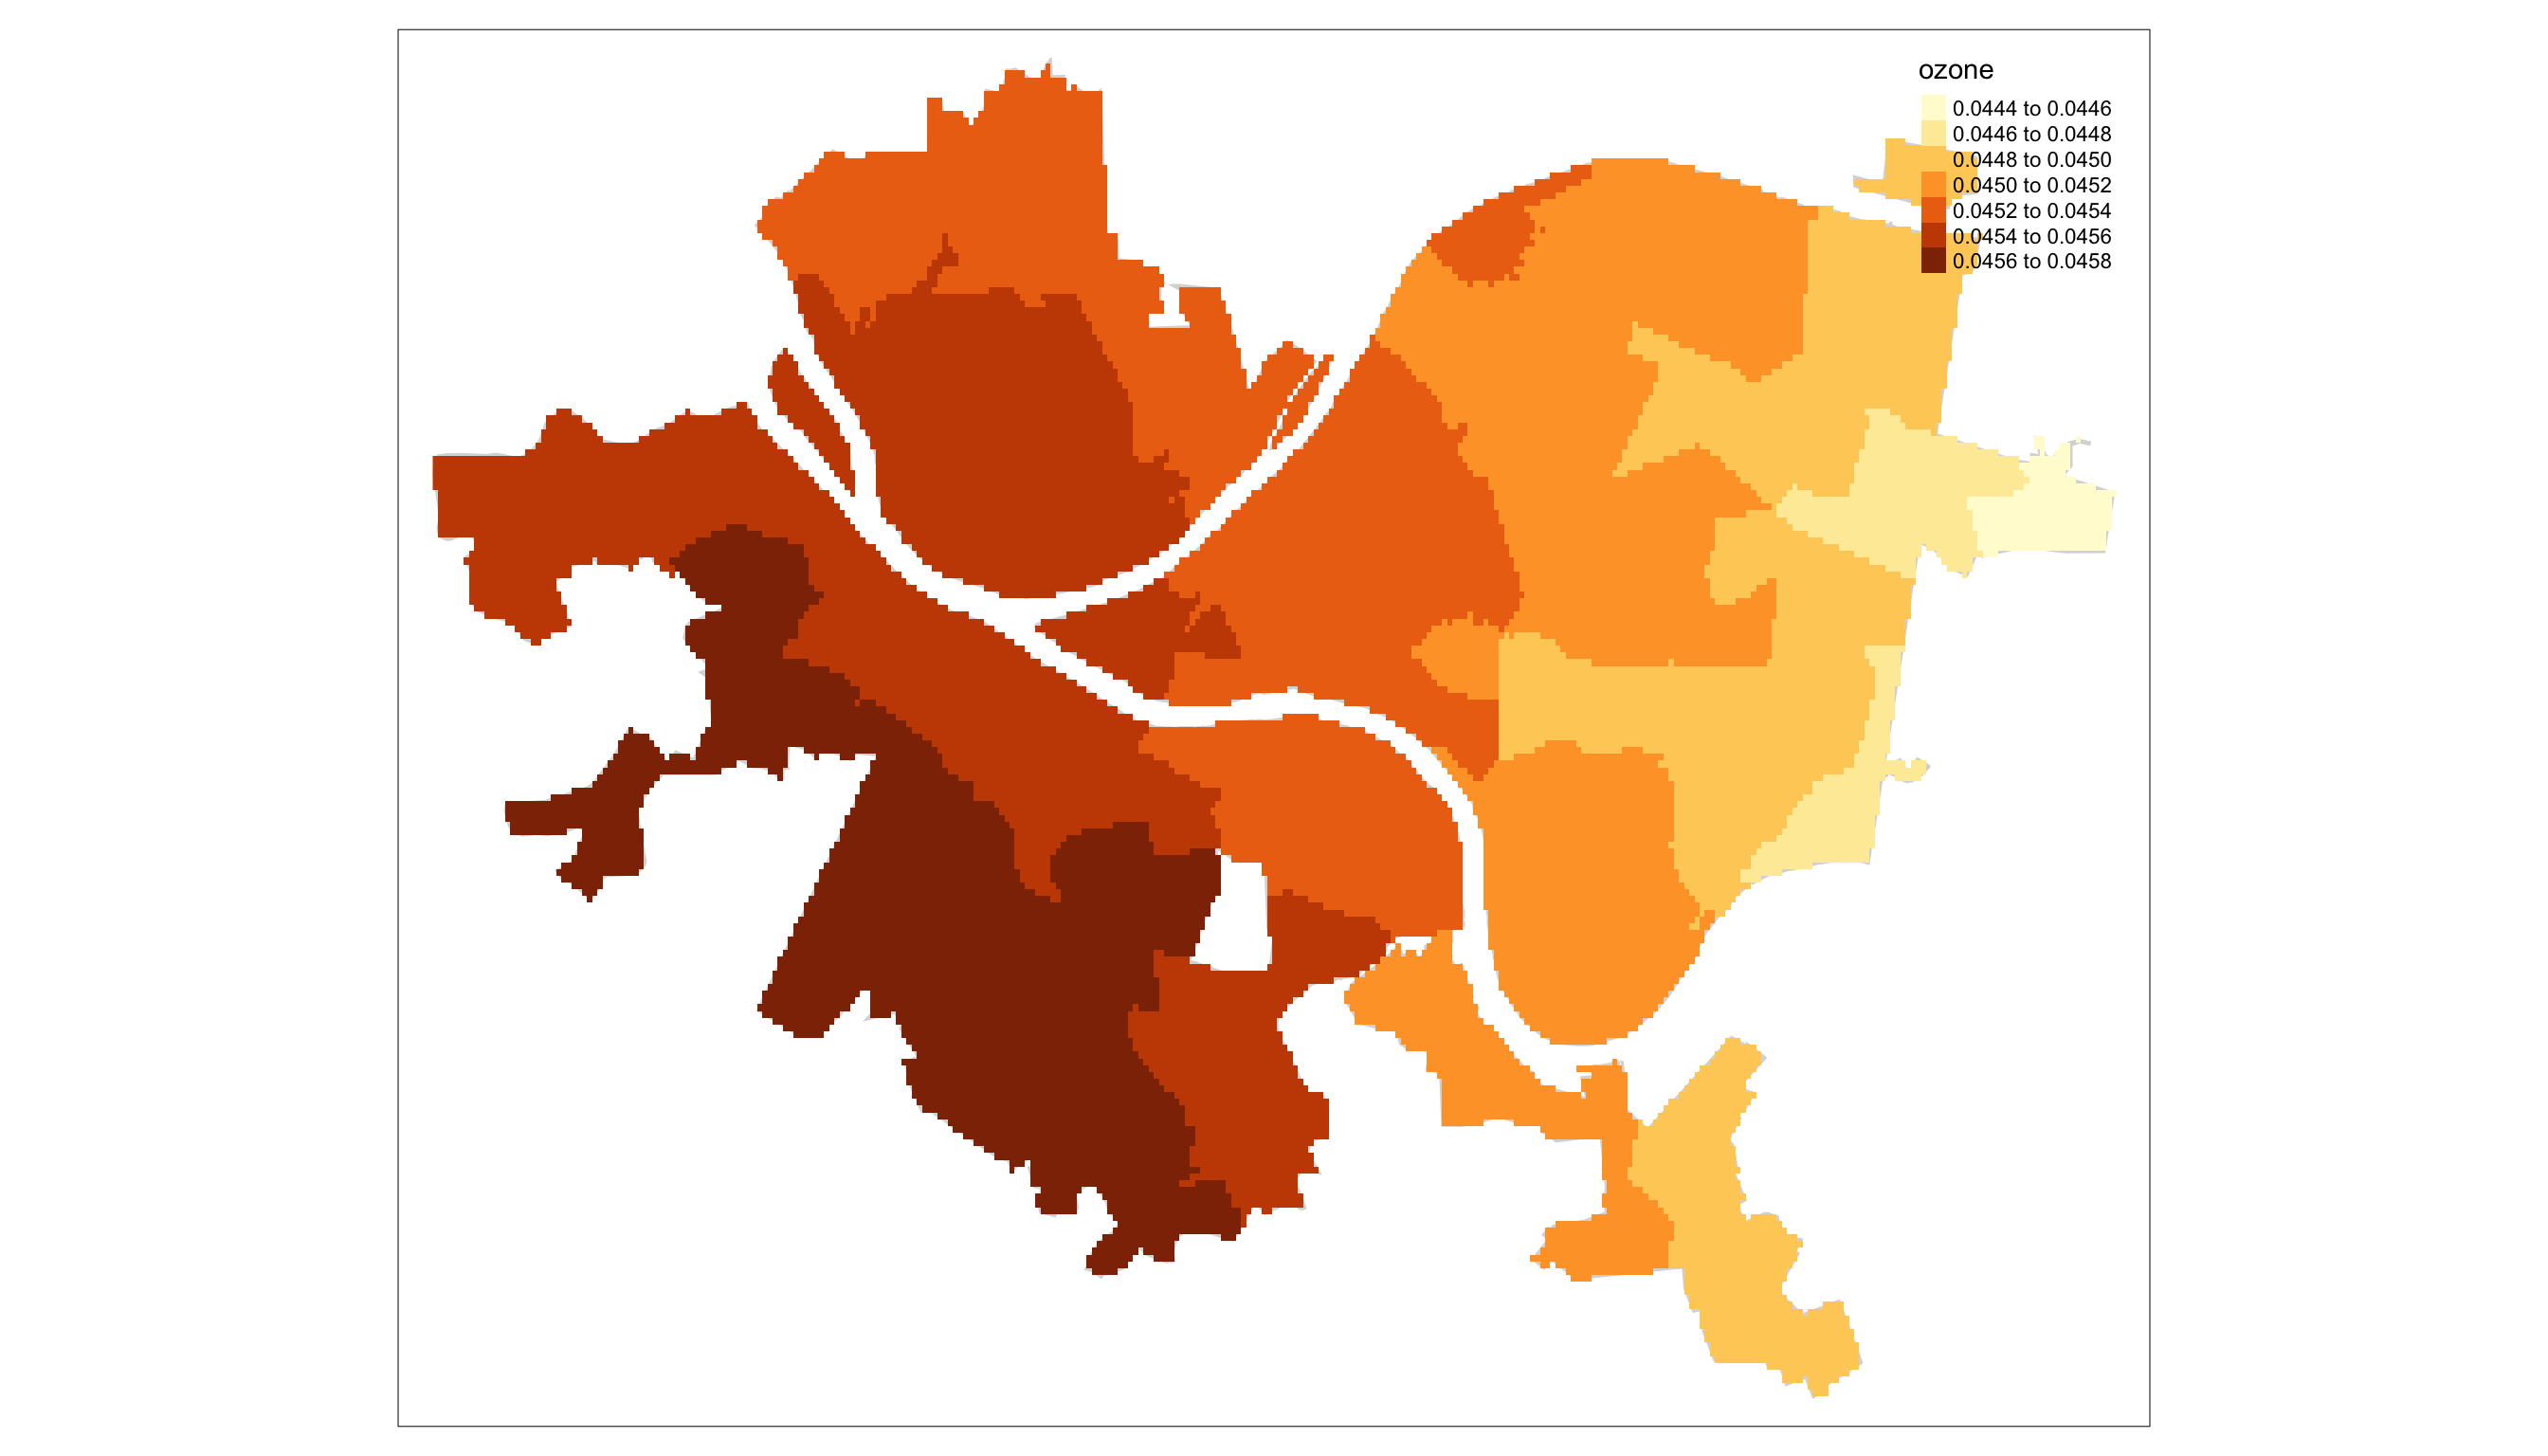 Estimated Ozone Surface across PGH using Neighborhood Centroids as prediction points for each Neighborhood's surface.